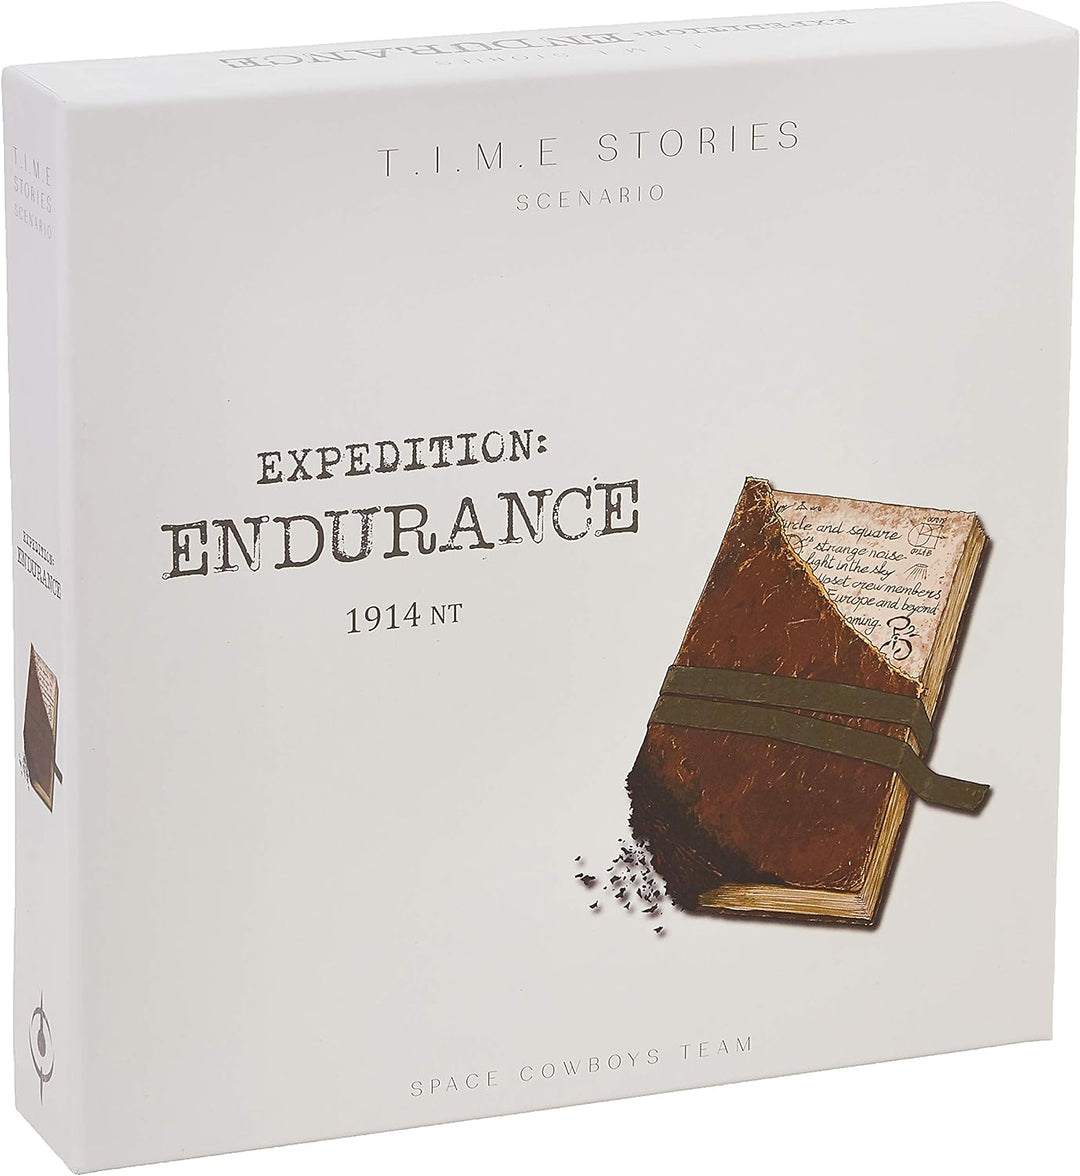 TIME Stories: Expedition Endurance Expansion Board Game